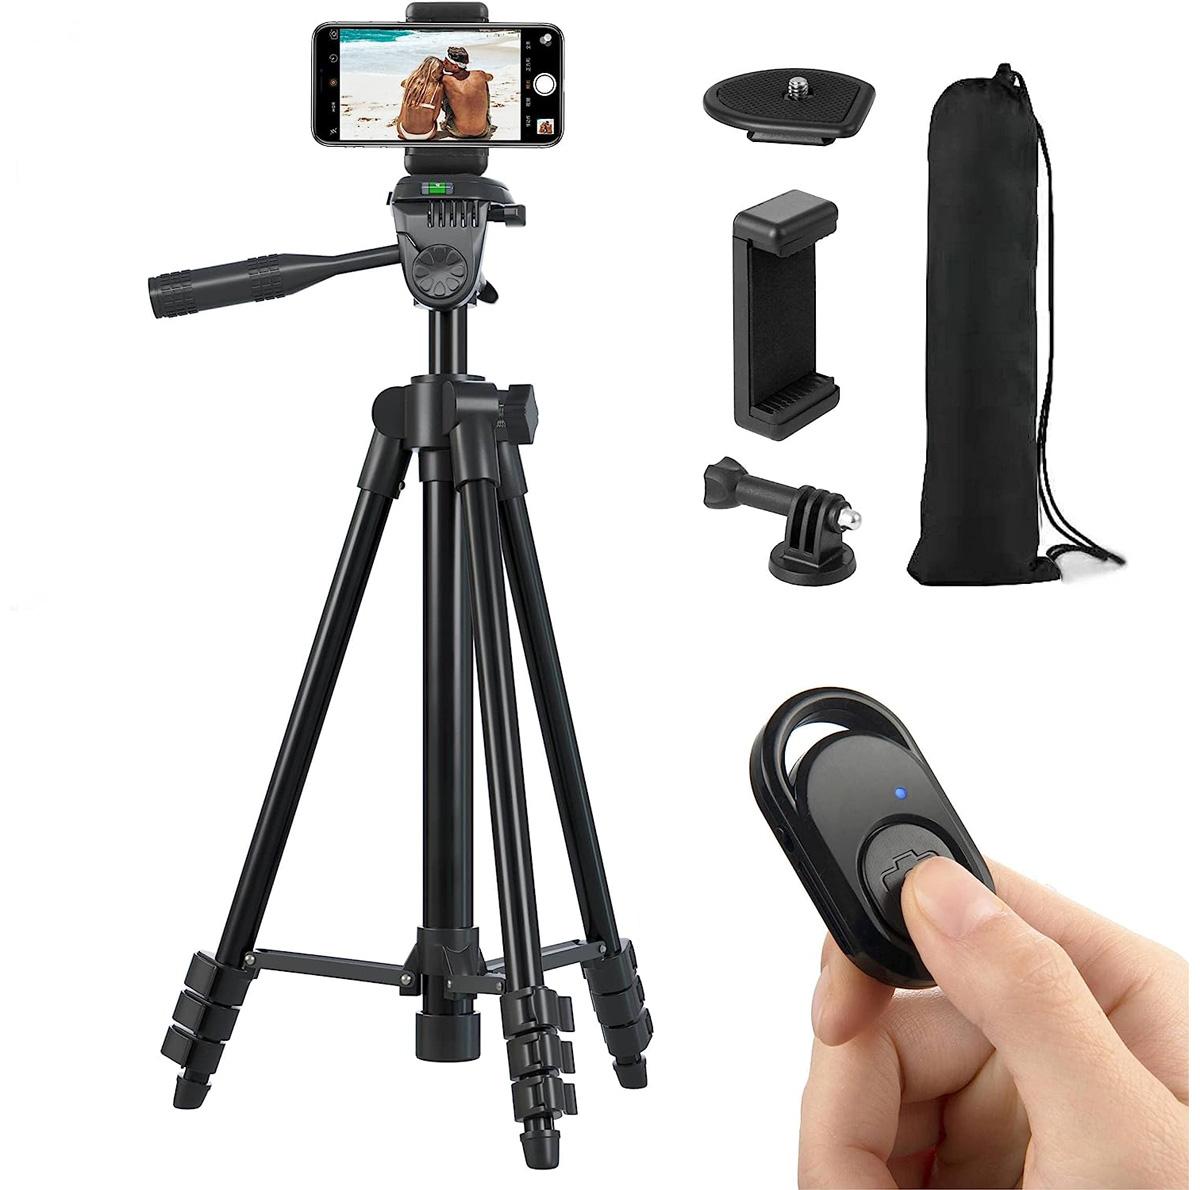 Camera Mount Phone Tripod Stand for $8.49